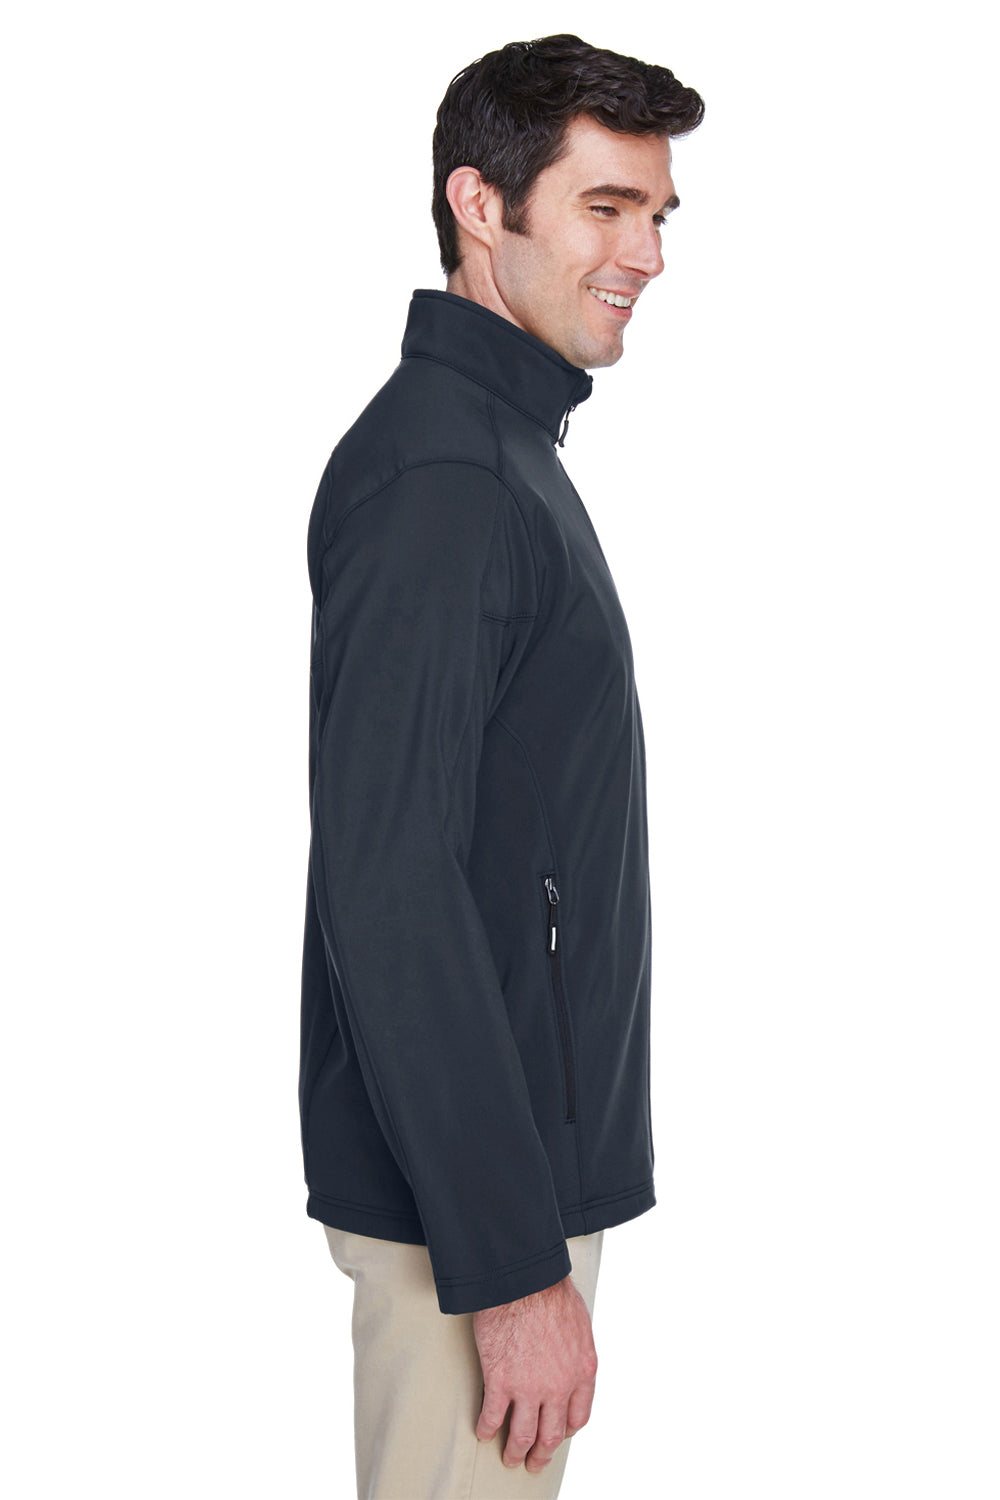 Core 365 88184 Mens Cruise Water Resistant Full Zip Jacket Carbon Grey Side